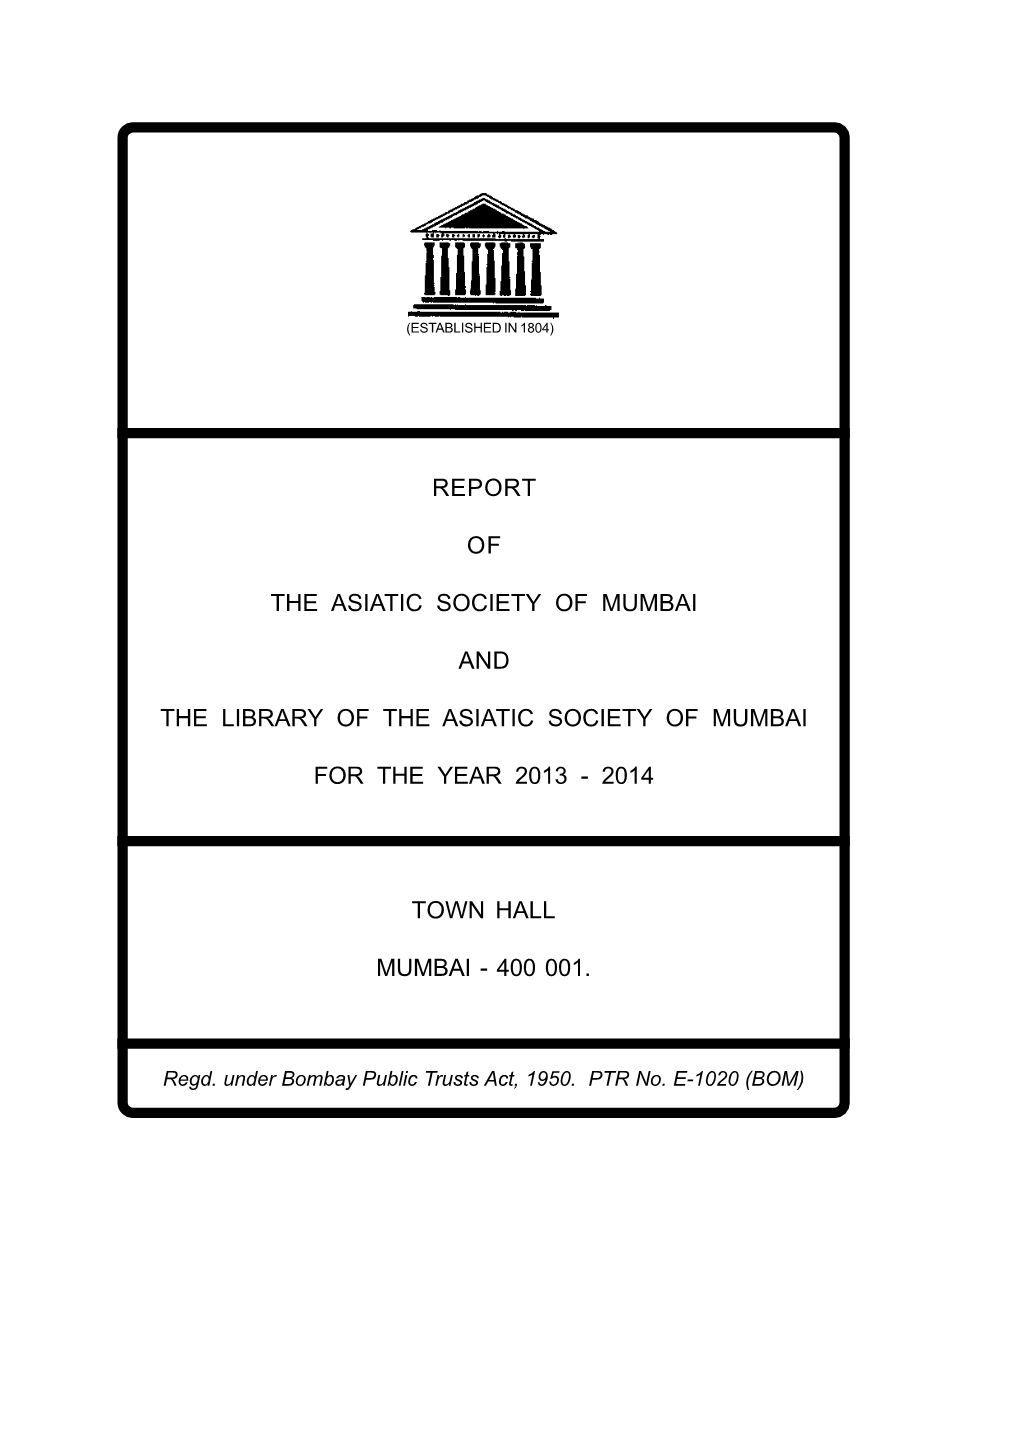 Report of the Asiatic Society of Mumbai and the Library